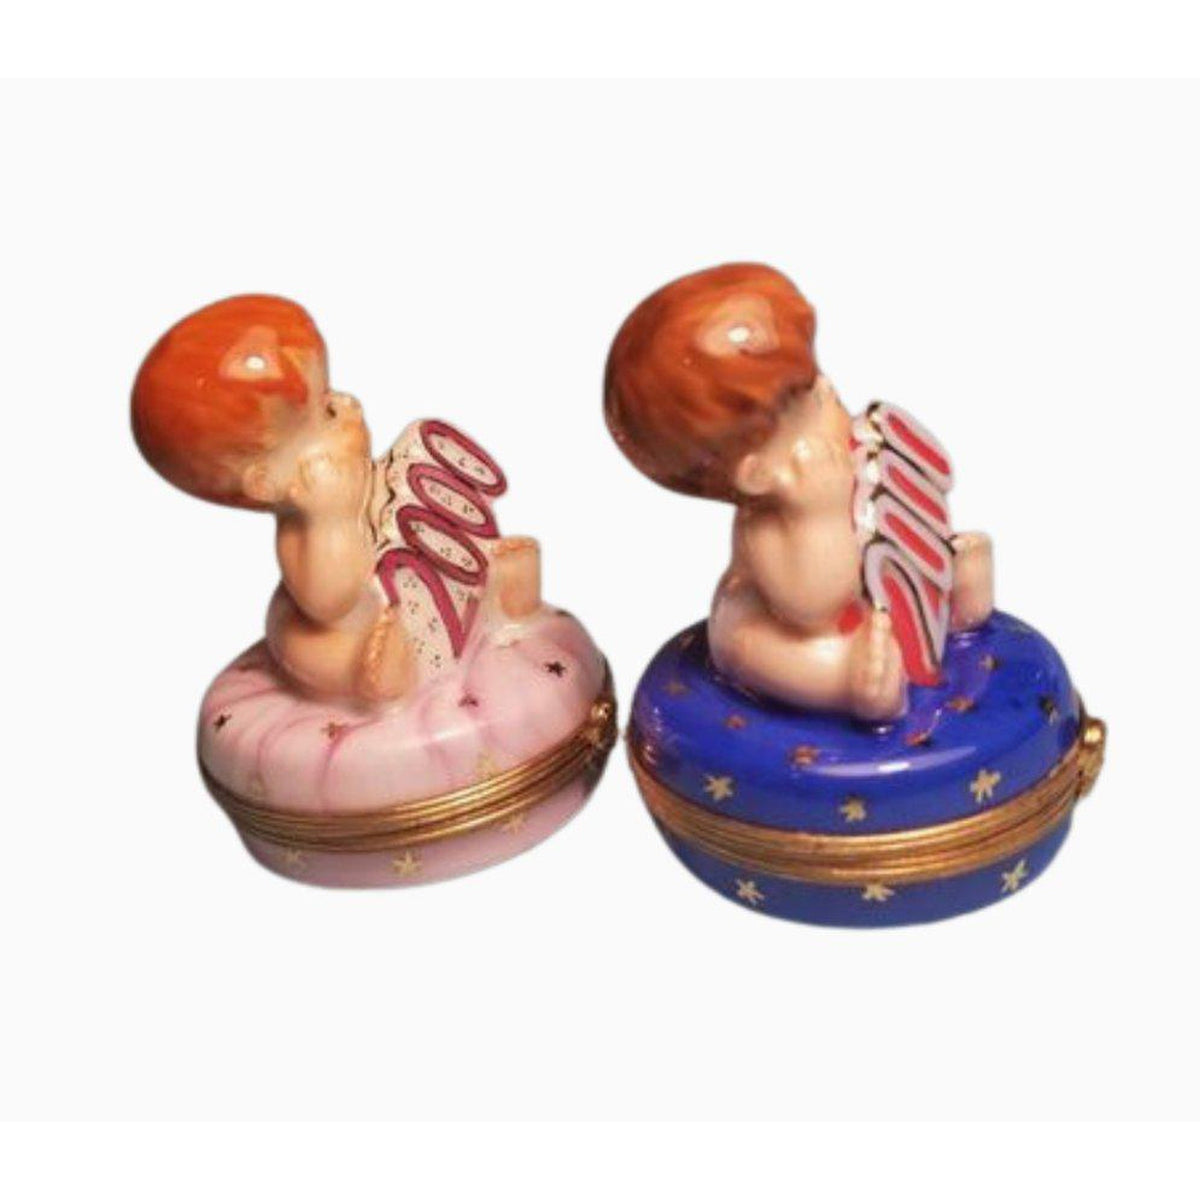 2 Babies ! Year 2000 Baby Boy & 2000 Baby Girl - SALE Limoges Box Figurine - Limoges Box Boutique